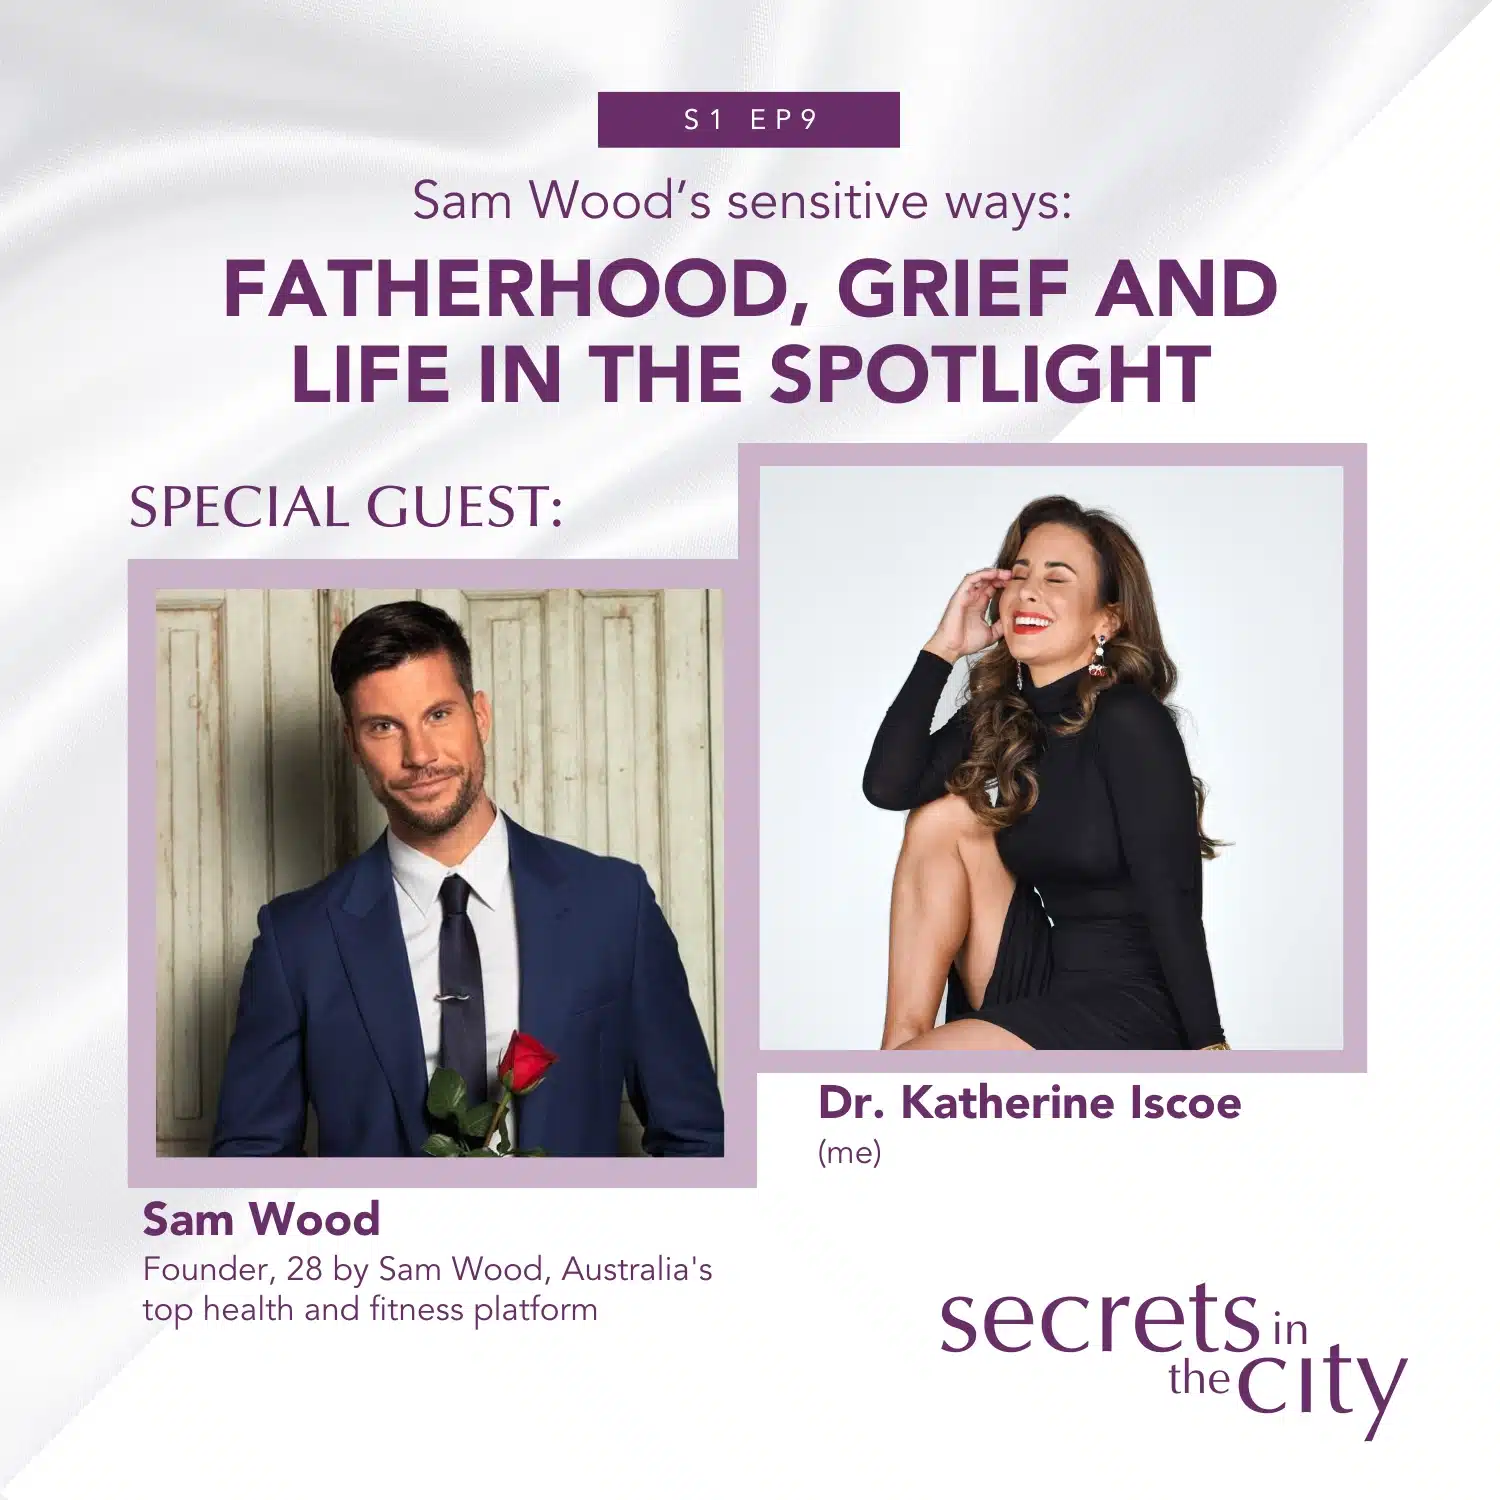 Sam Wood's Sensitive Ways Podcast - Secrets in the City podcast cover featuring photos of Sam Wood and Dr. Katherine Iscoe